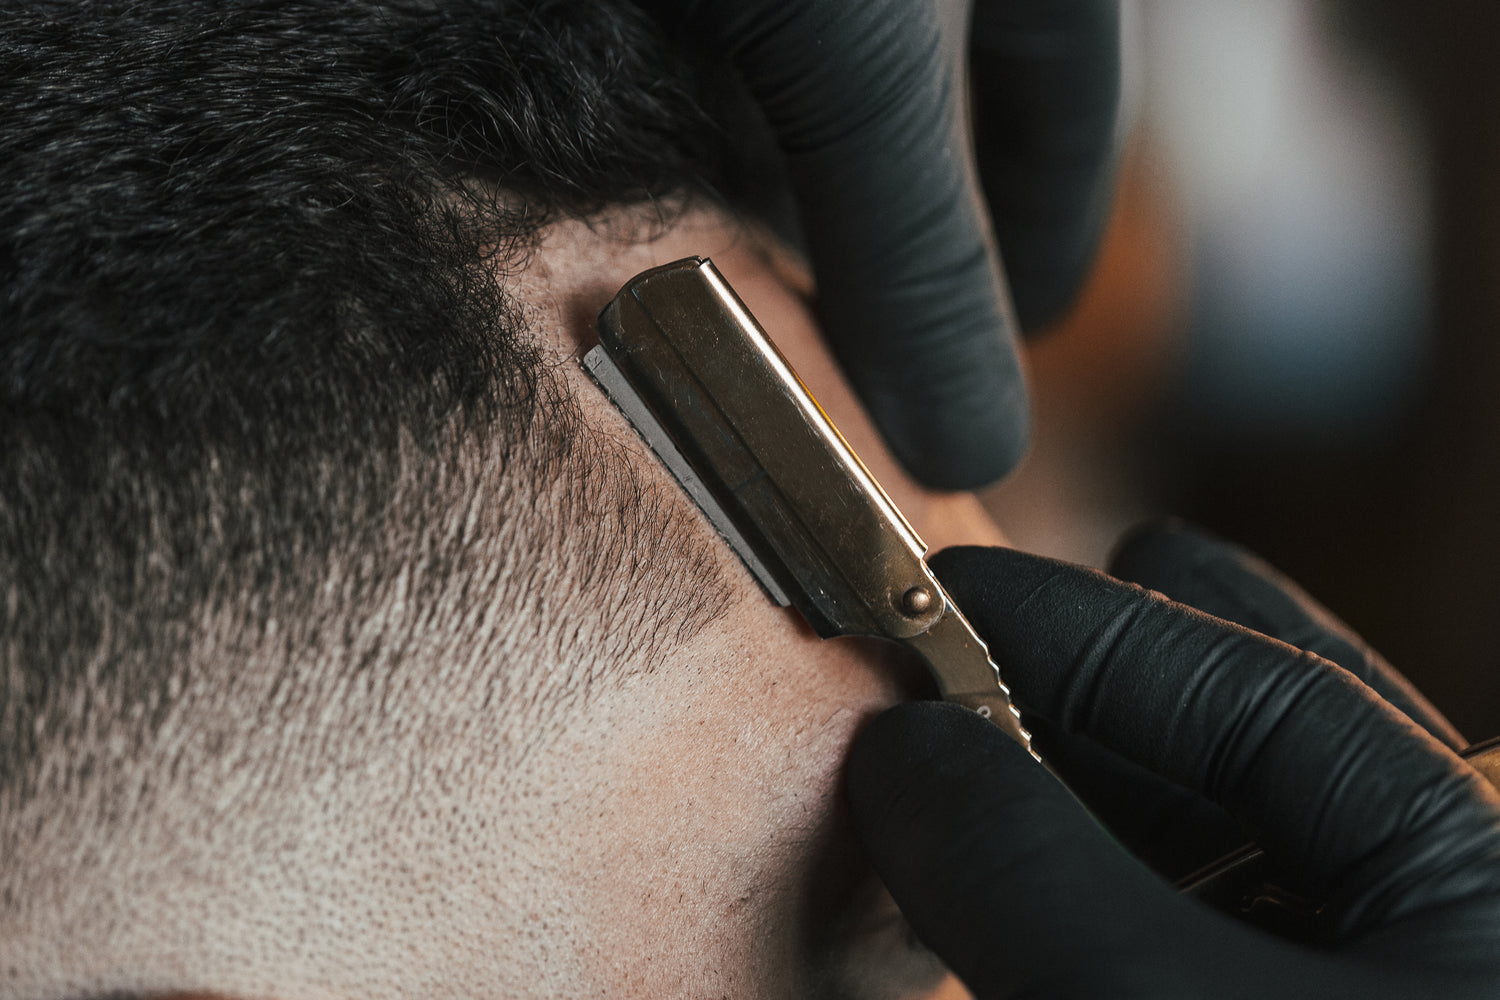 Number 3 haircut uses a number 3 guard to cut ⅜ of an inch of hair. The most popular clipper size to cut a fade or buzz cut. Other levels use 0, 1.5, 6, and 10 guard.